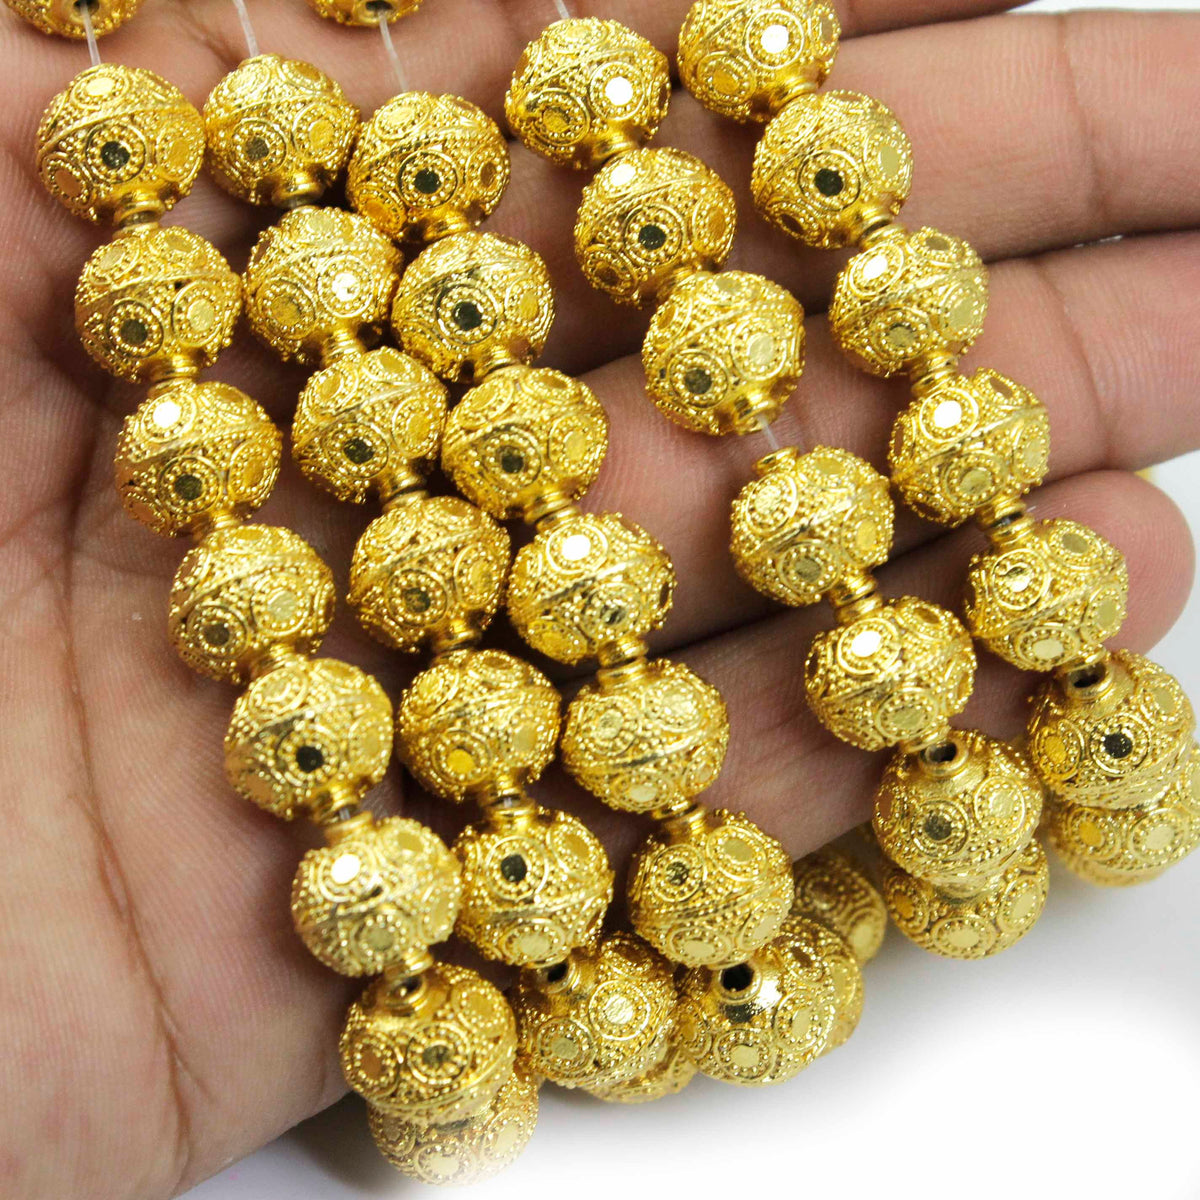 7 Strands Designer Gold Plated Designer Copper Casting Round Ball Beads,Jewelry Making Supplies 7mm 8 inches Bulk Lot CCB117